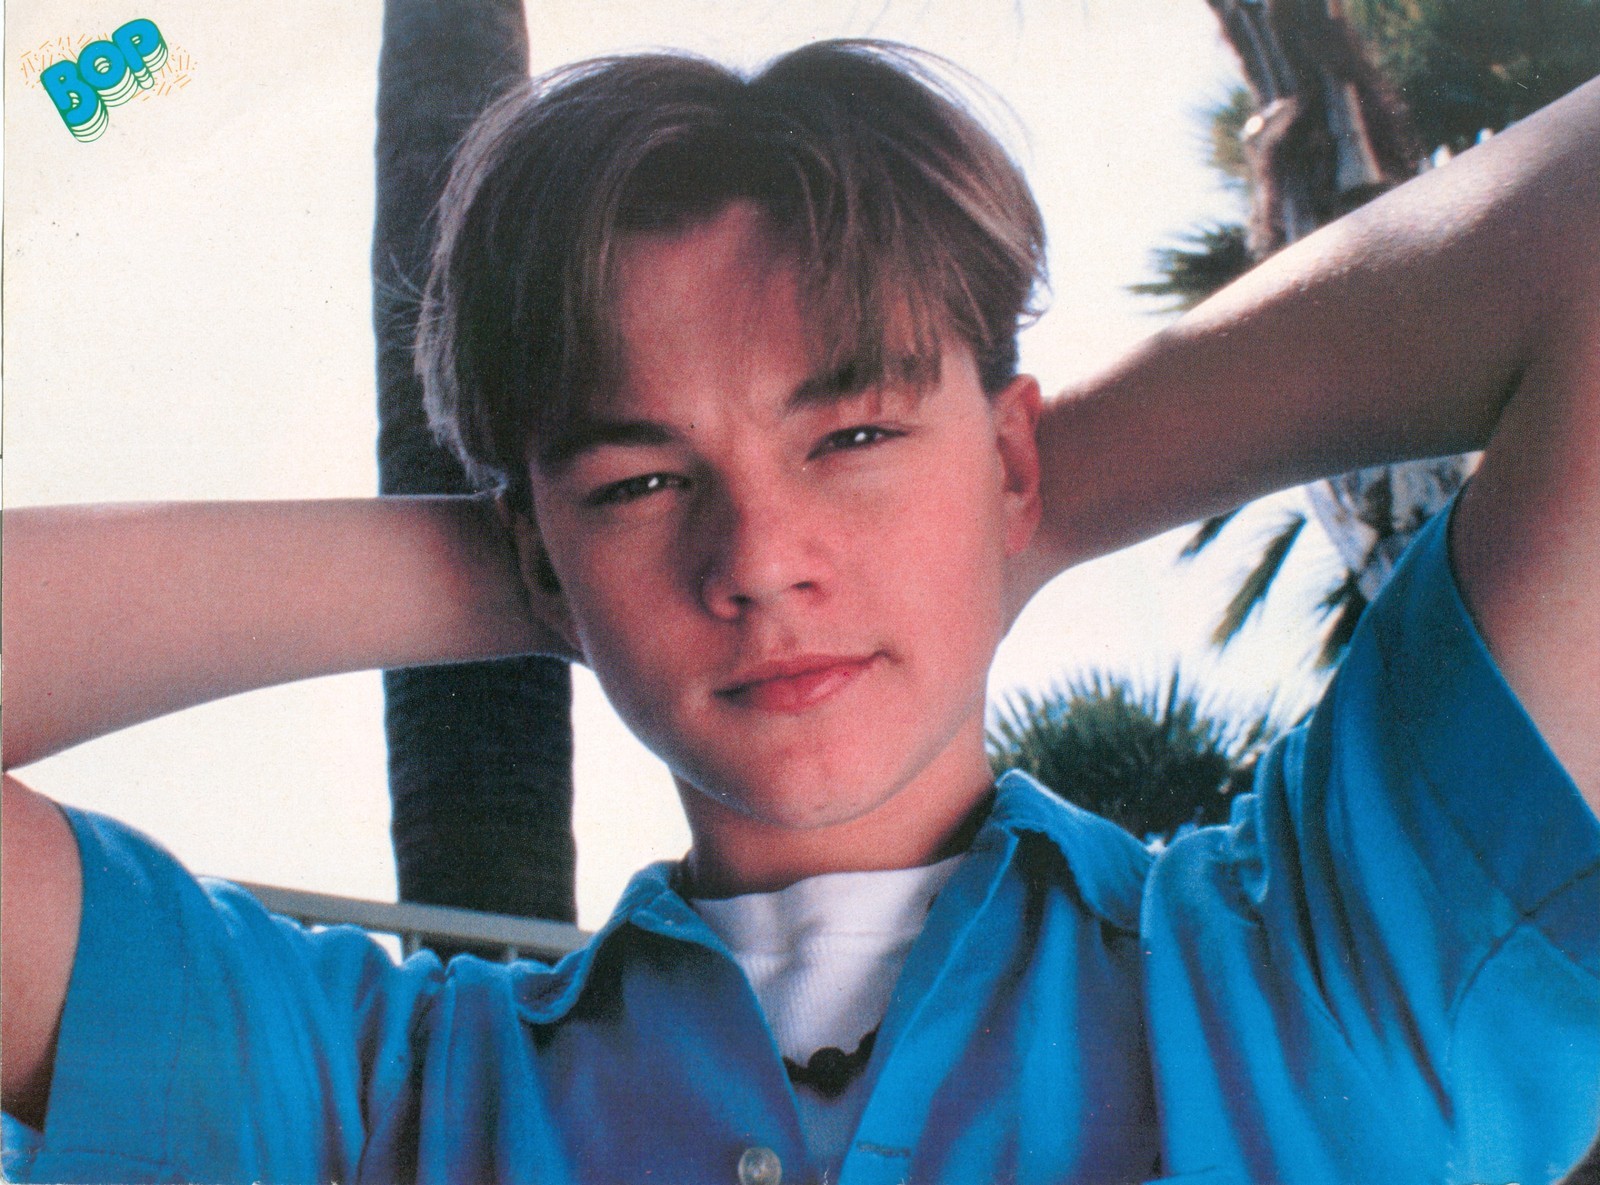 Leonardo Dicaprio 25 Heartthrob Posters From The 90s Youll Totally Want To Put On Your Walls 